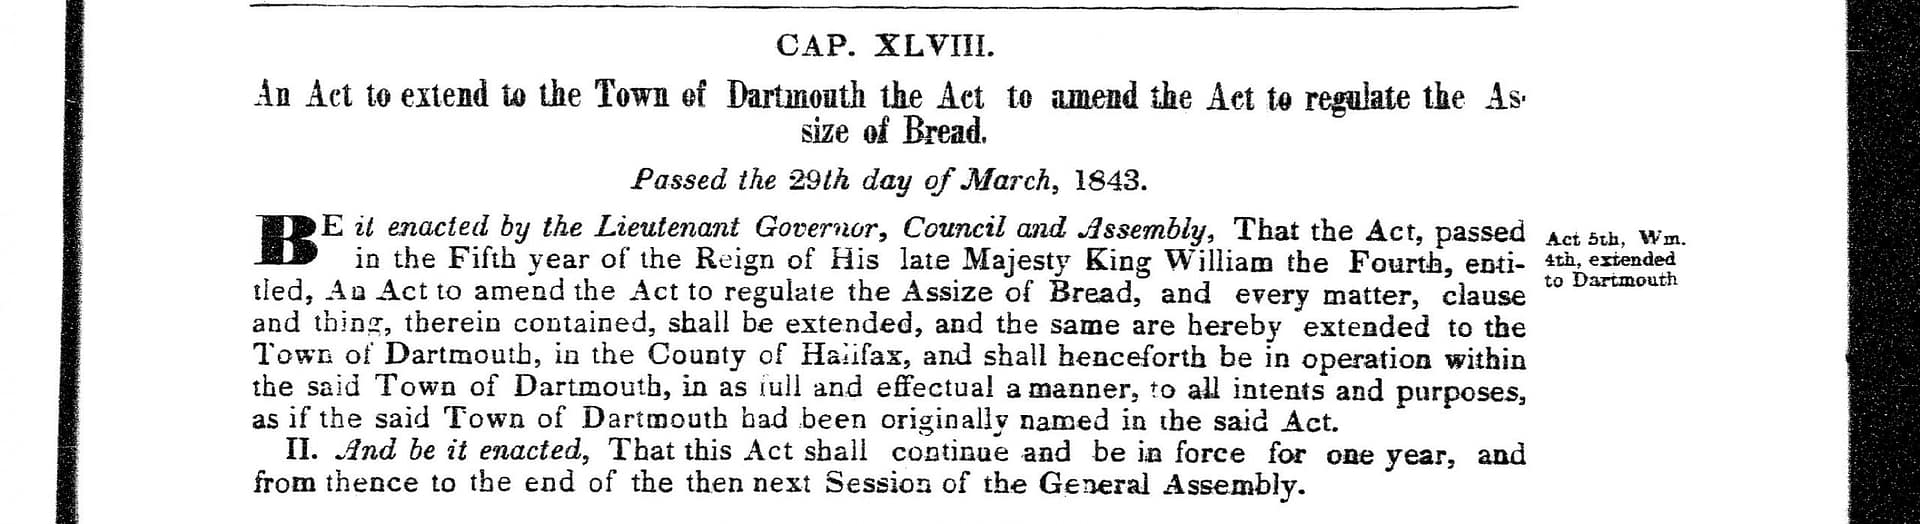 To extend the Act to regulate the Assize of Bread to the Town of Dartmouth, 1843 c48